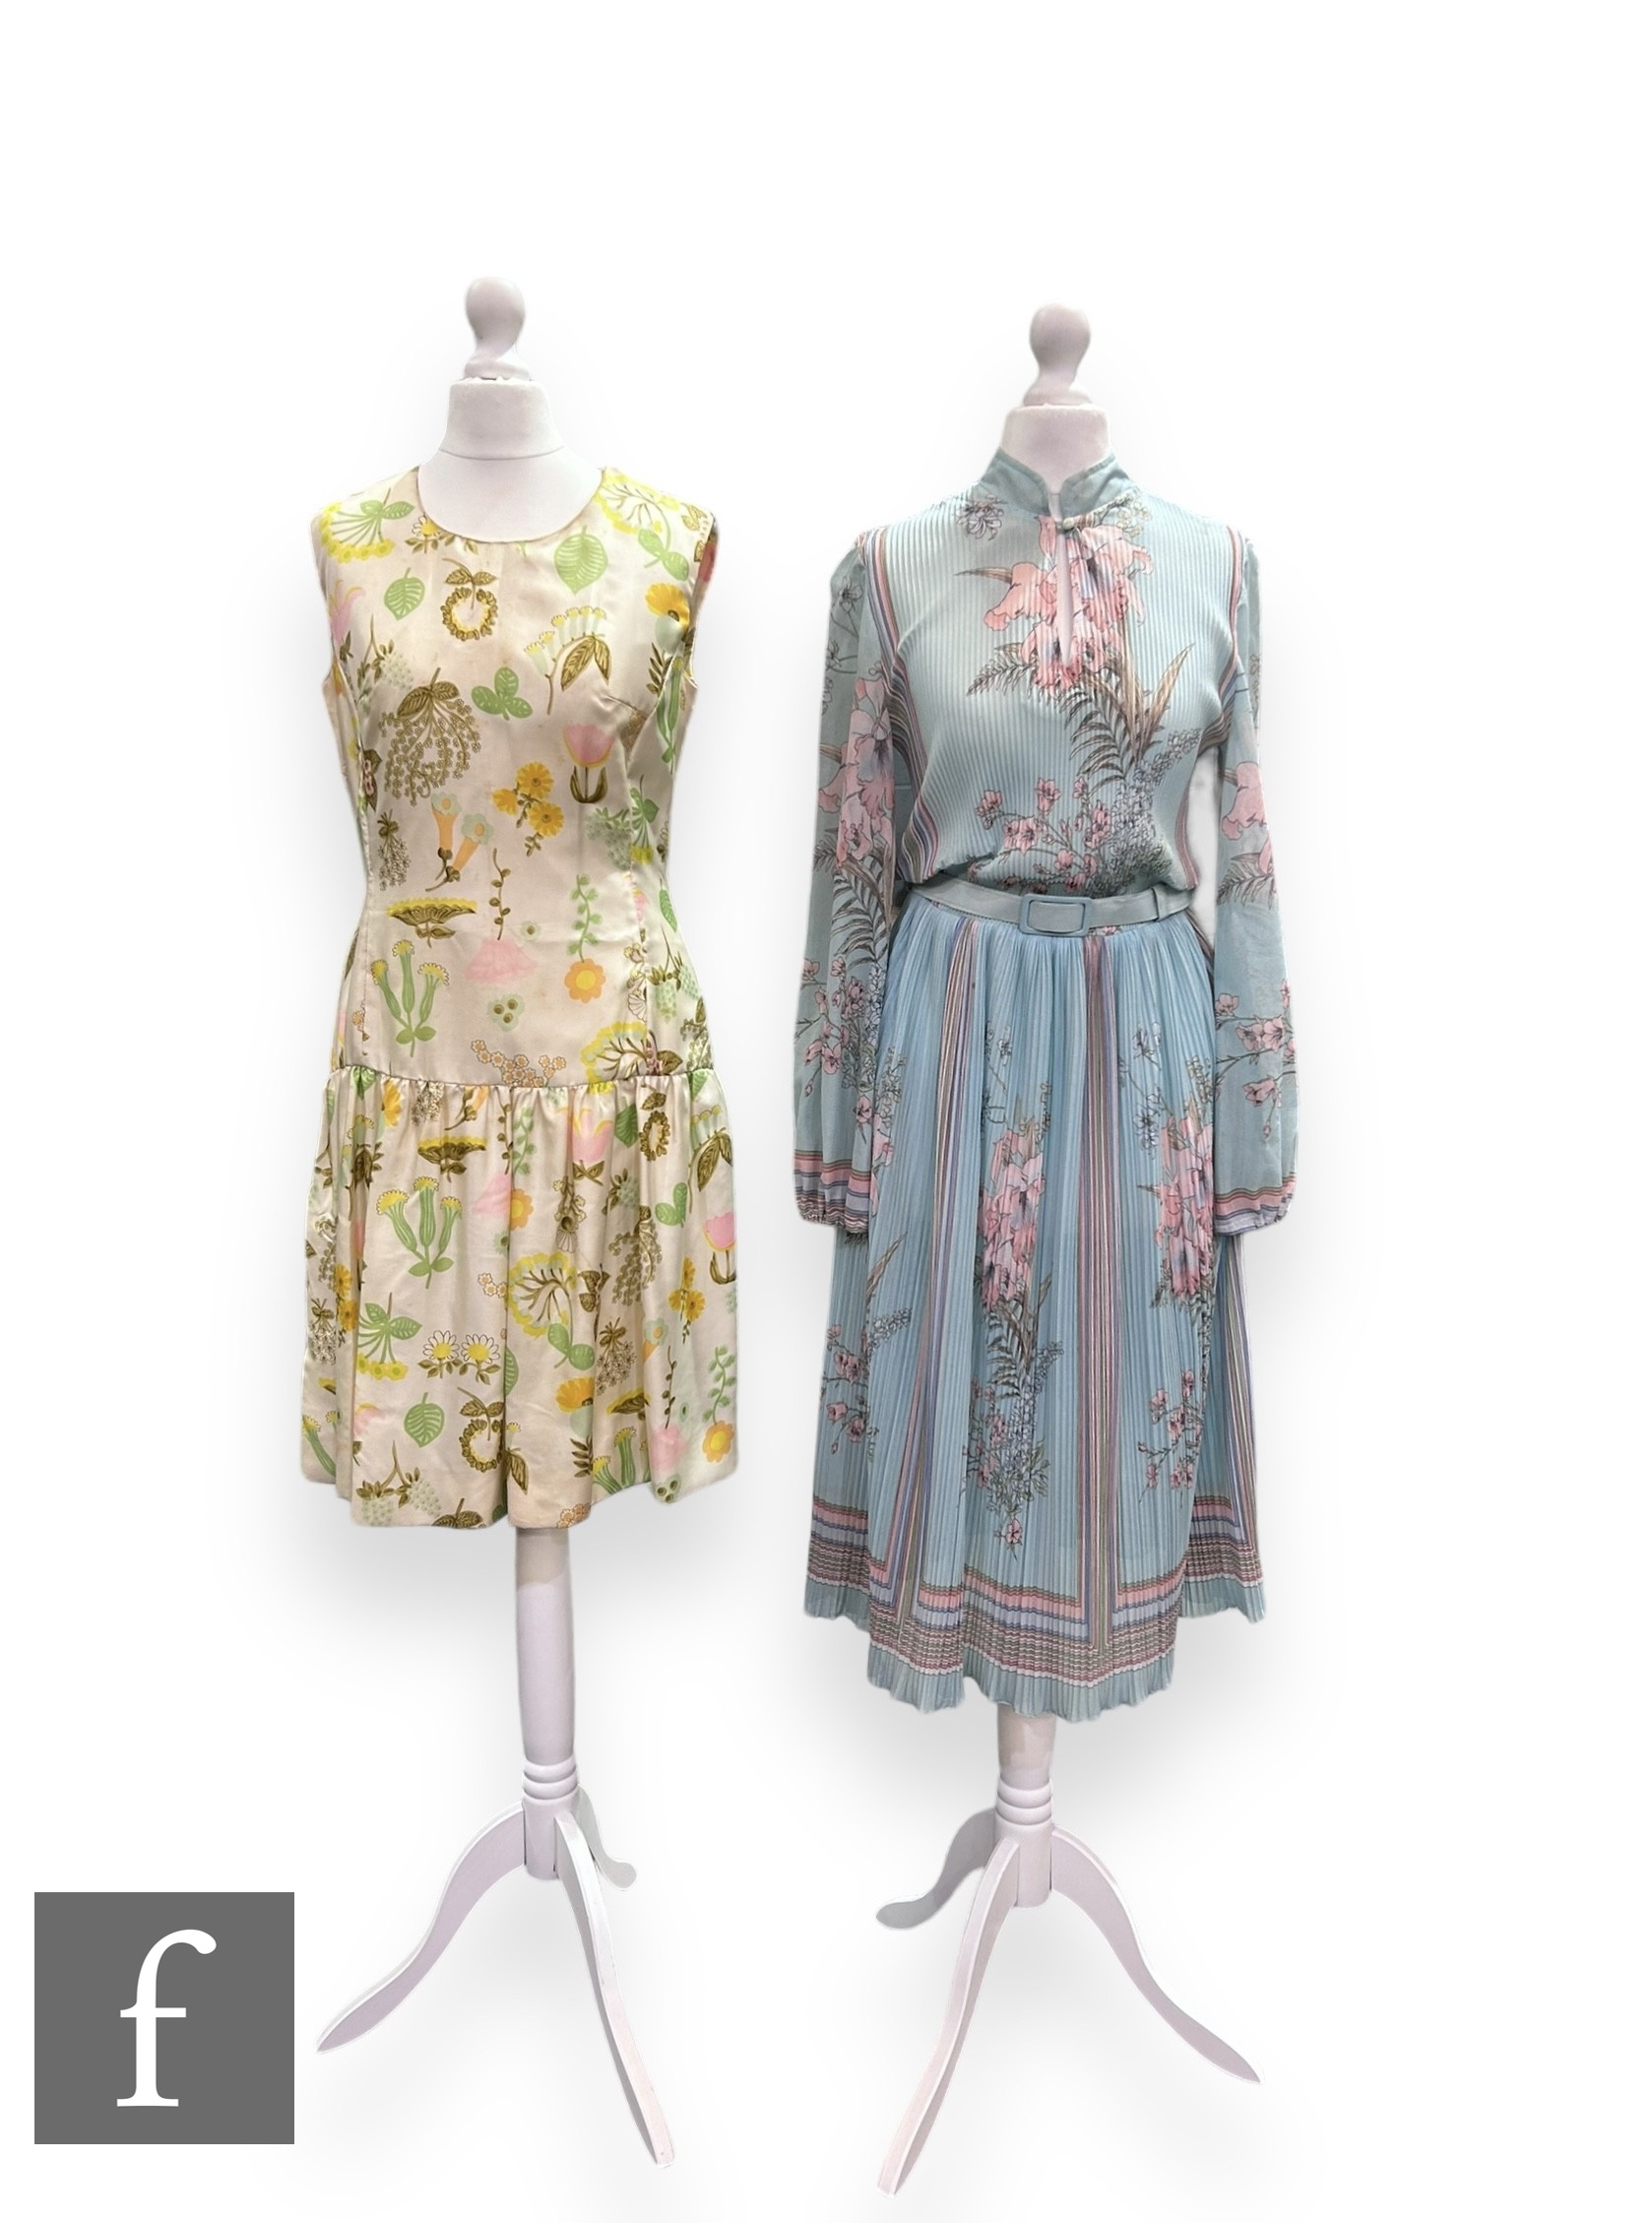 A 1960s vintage high neck sleeveless mini dress, with drop waist with stylised floral motifs in